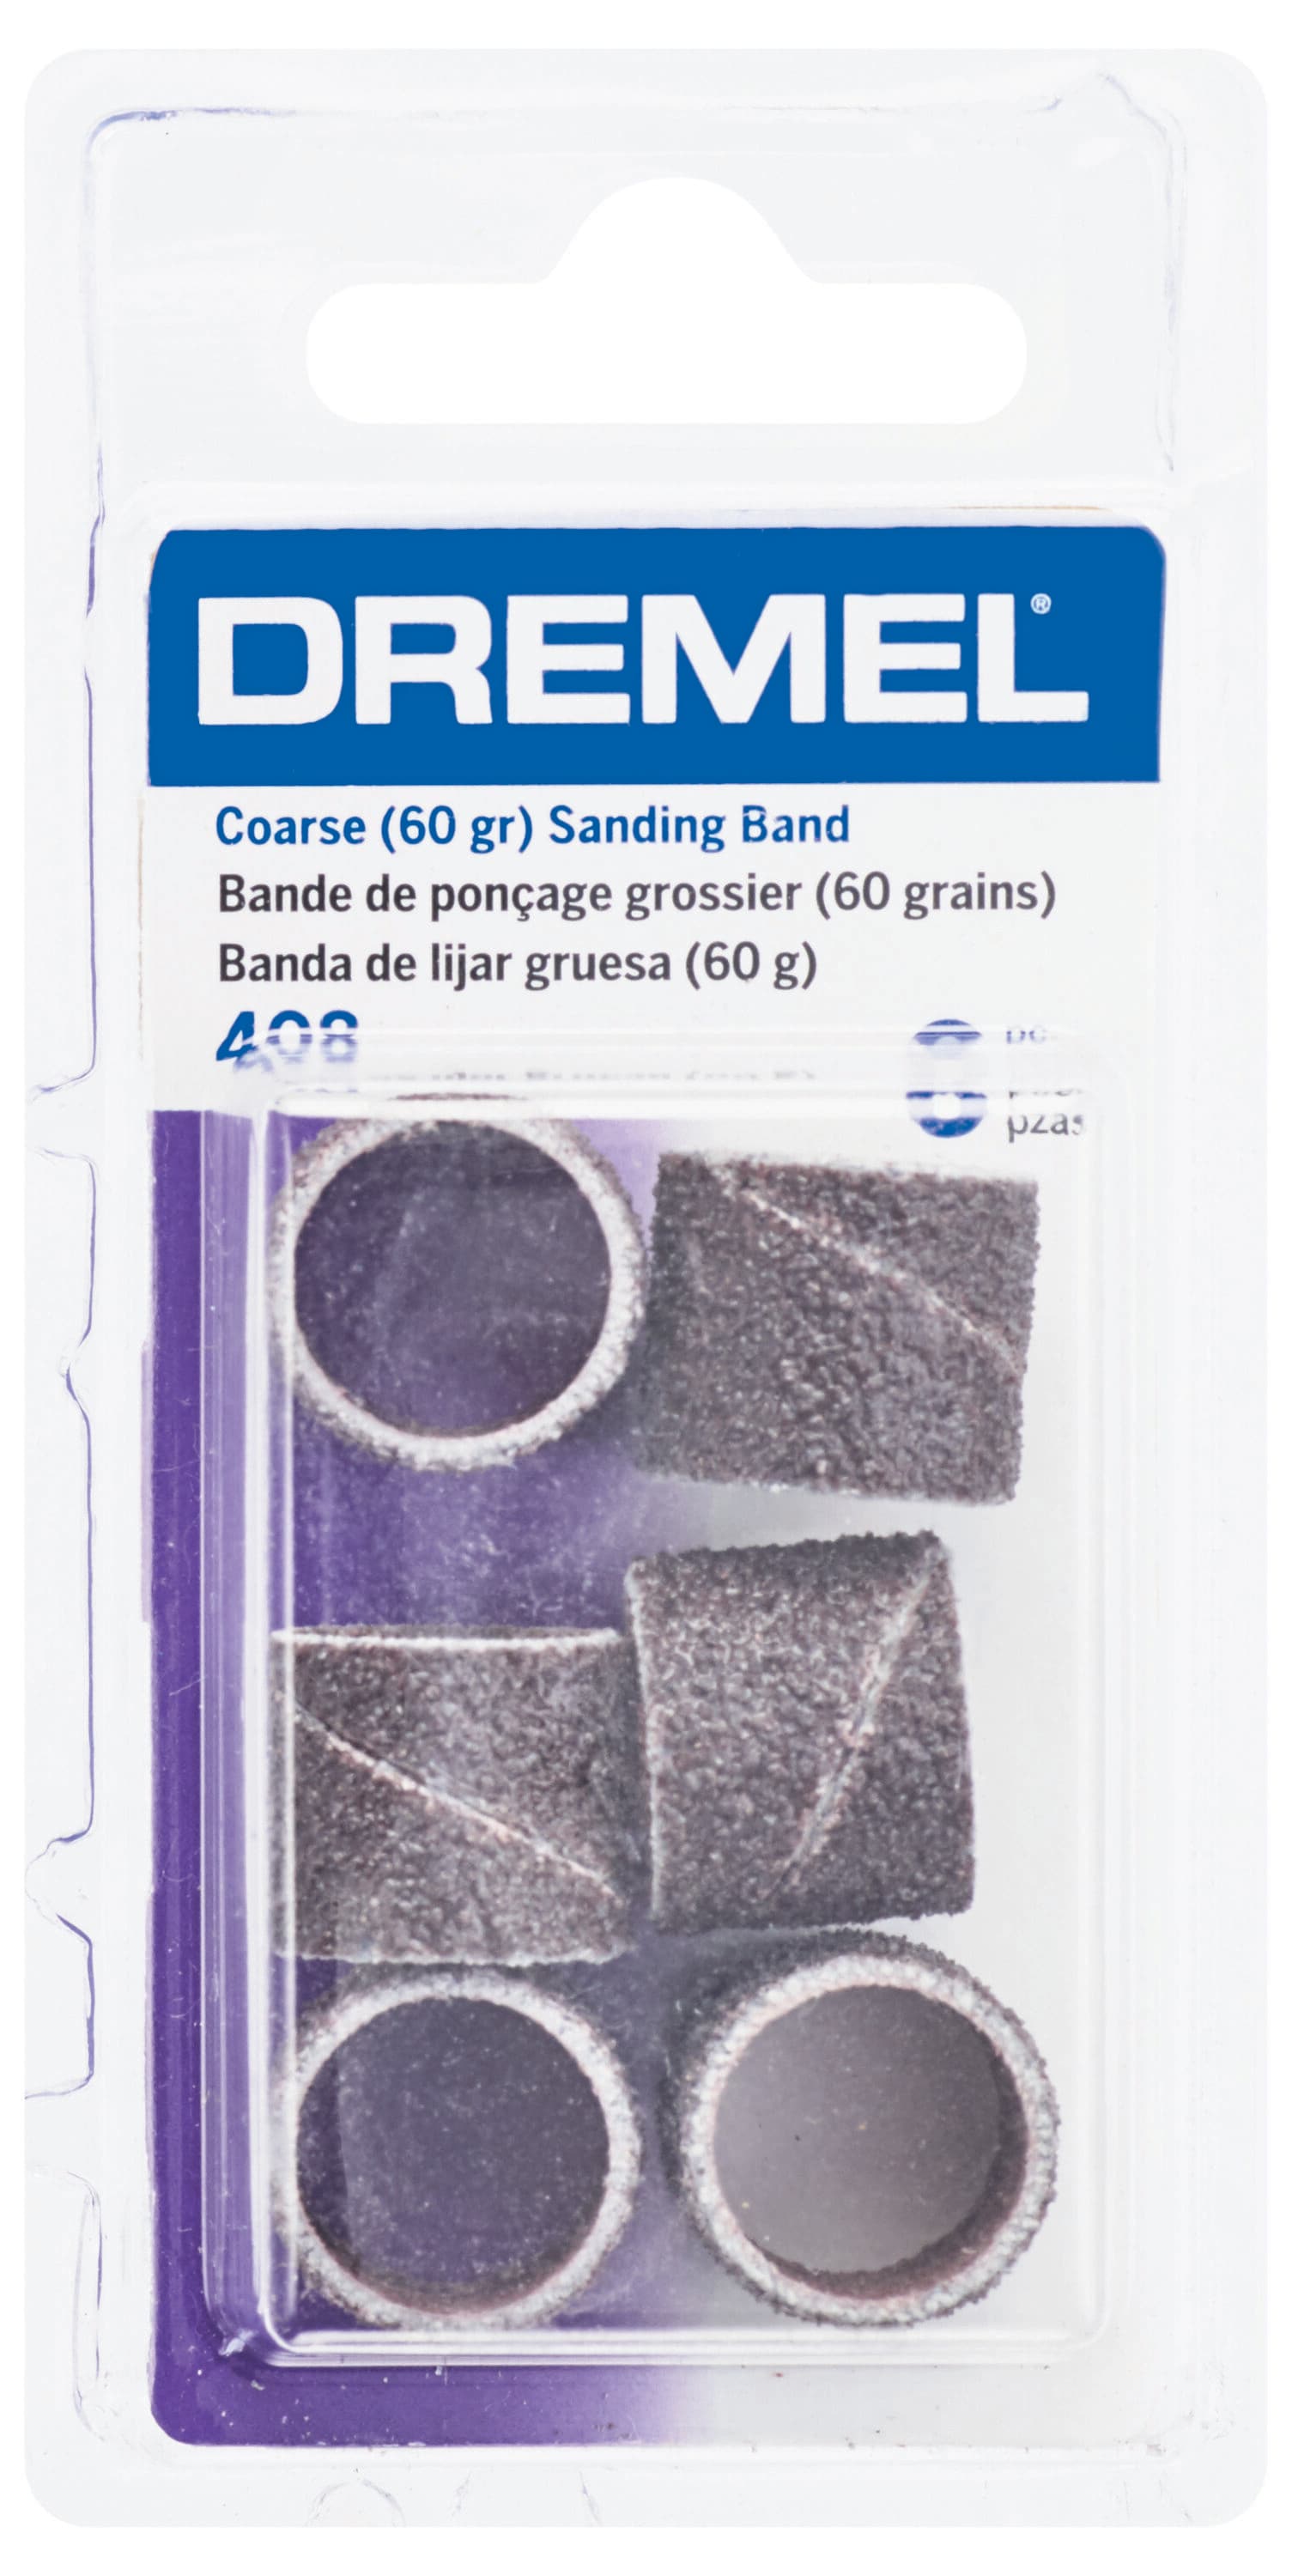 DREMEL 407 Sanding Drum, 60 Grit, For Use With Dremel Rotary Tool